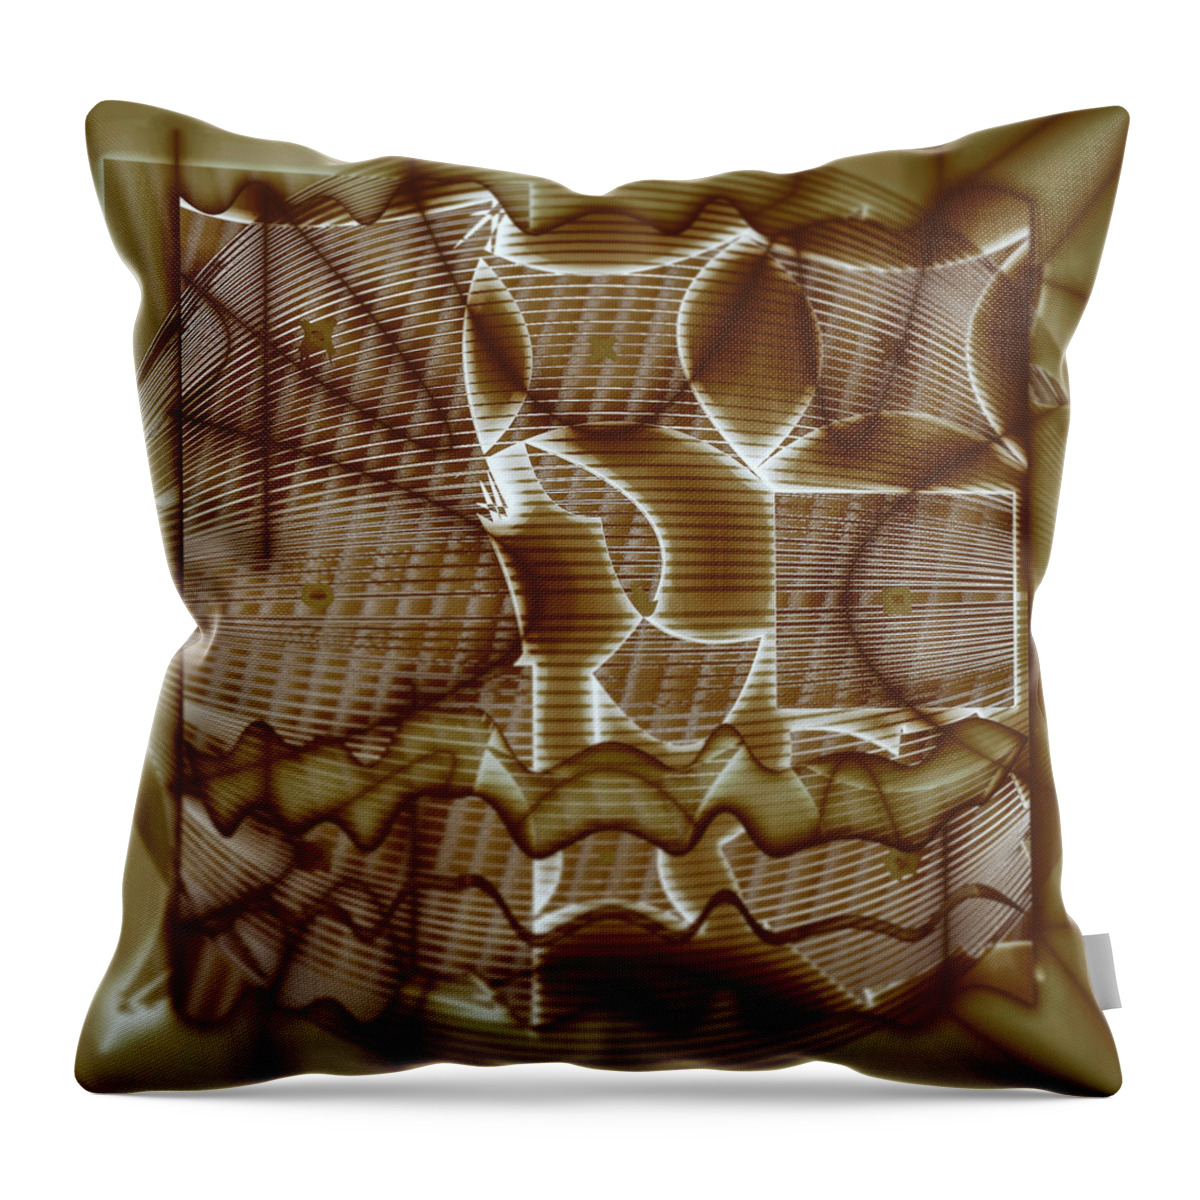 Abstract Throw Pillow featuring the digital art Pattern 28 by Marko Sabotin